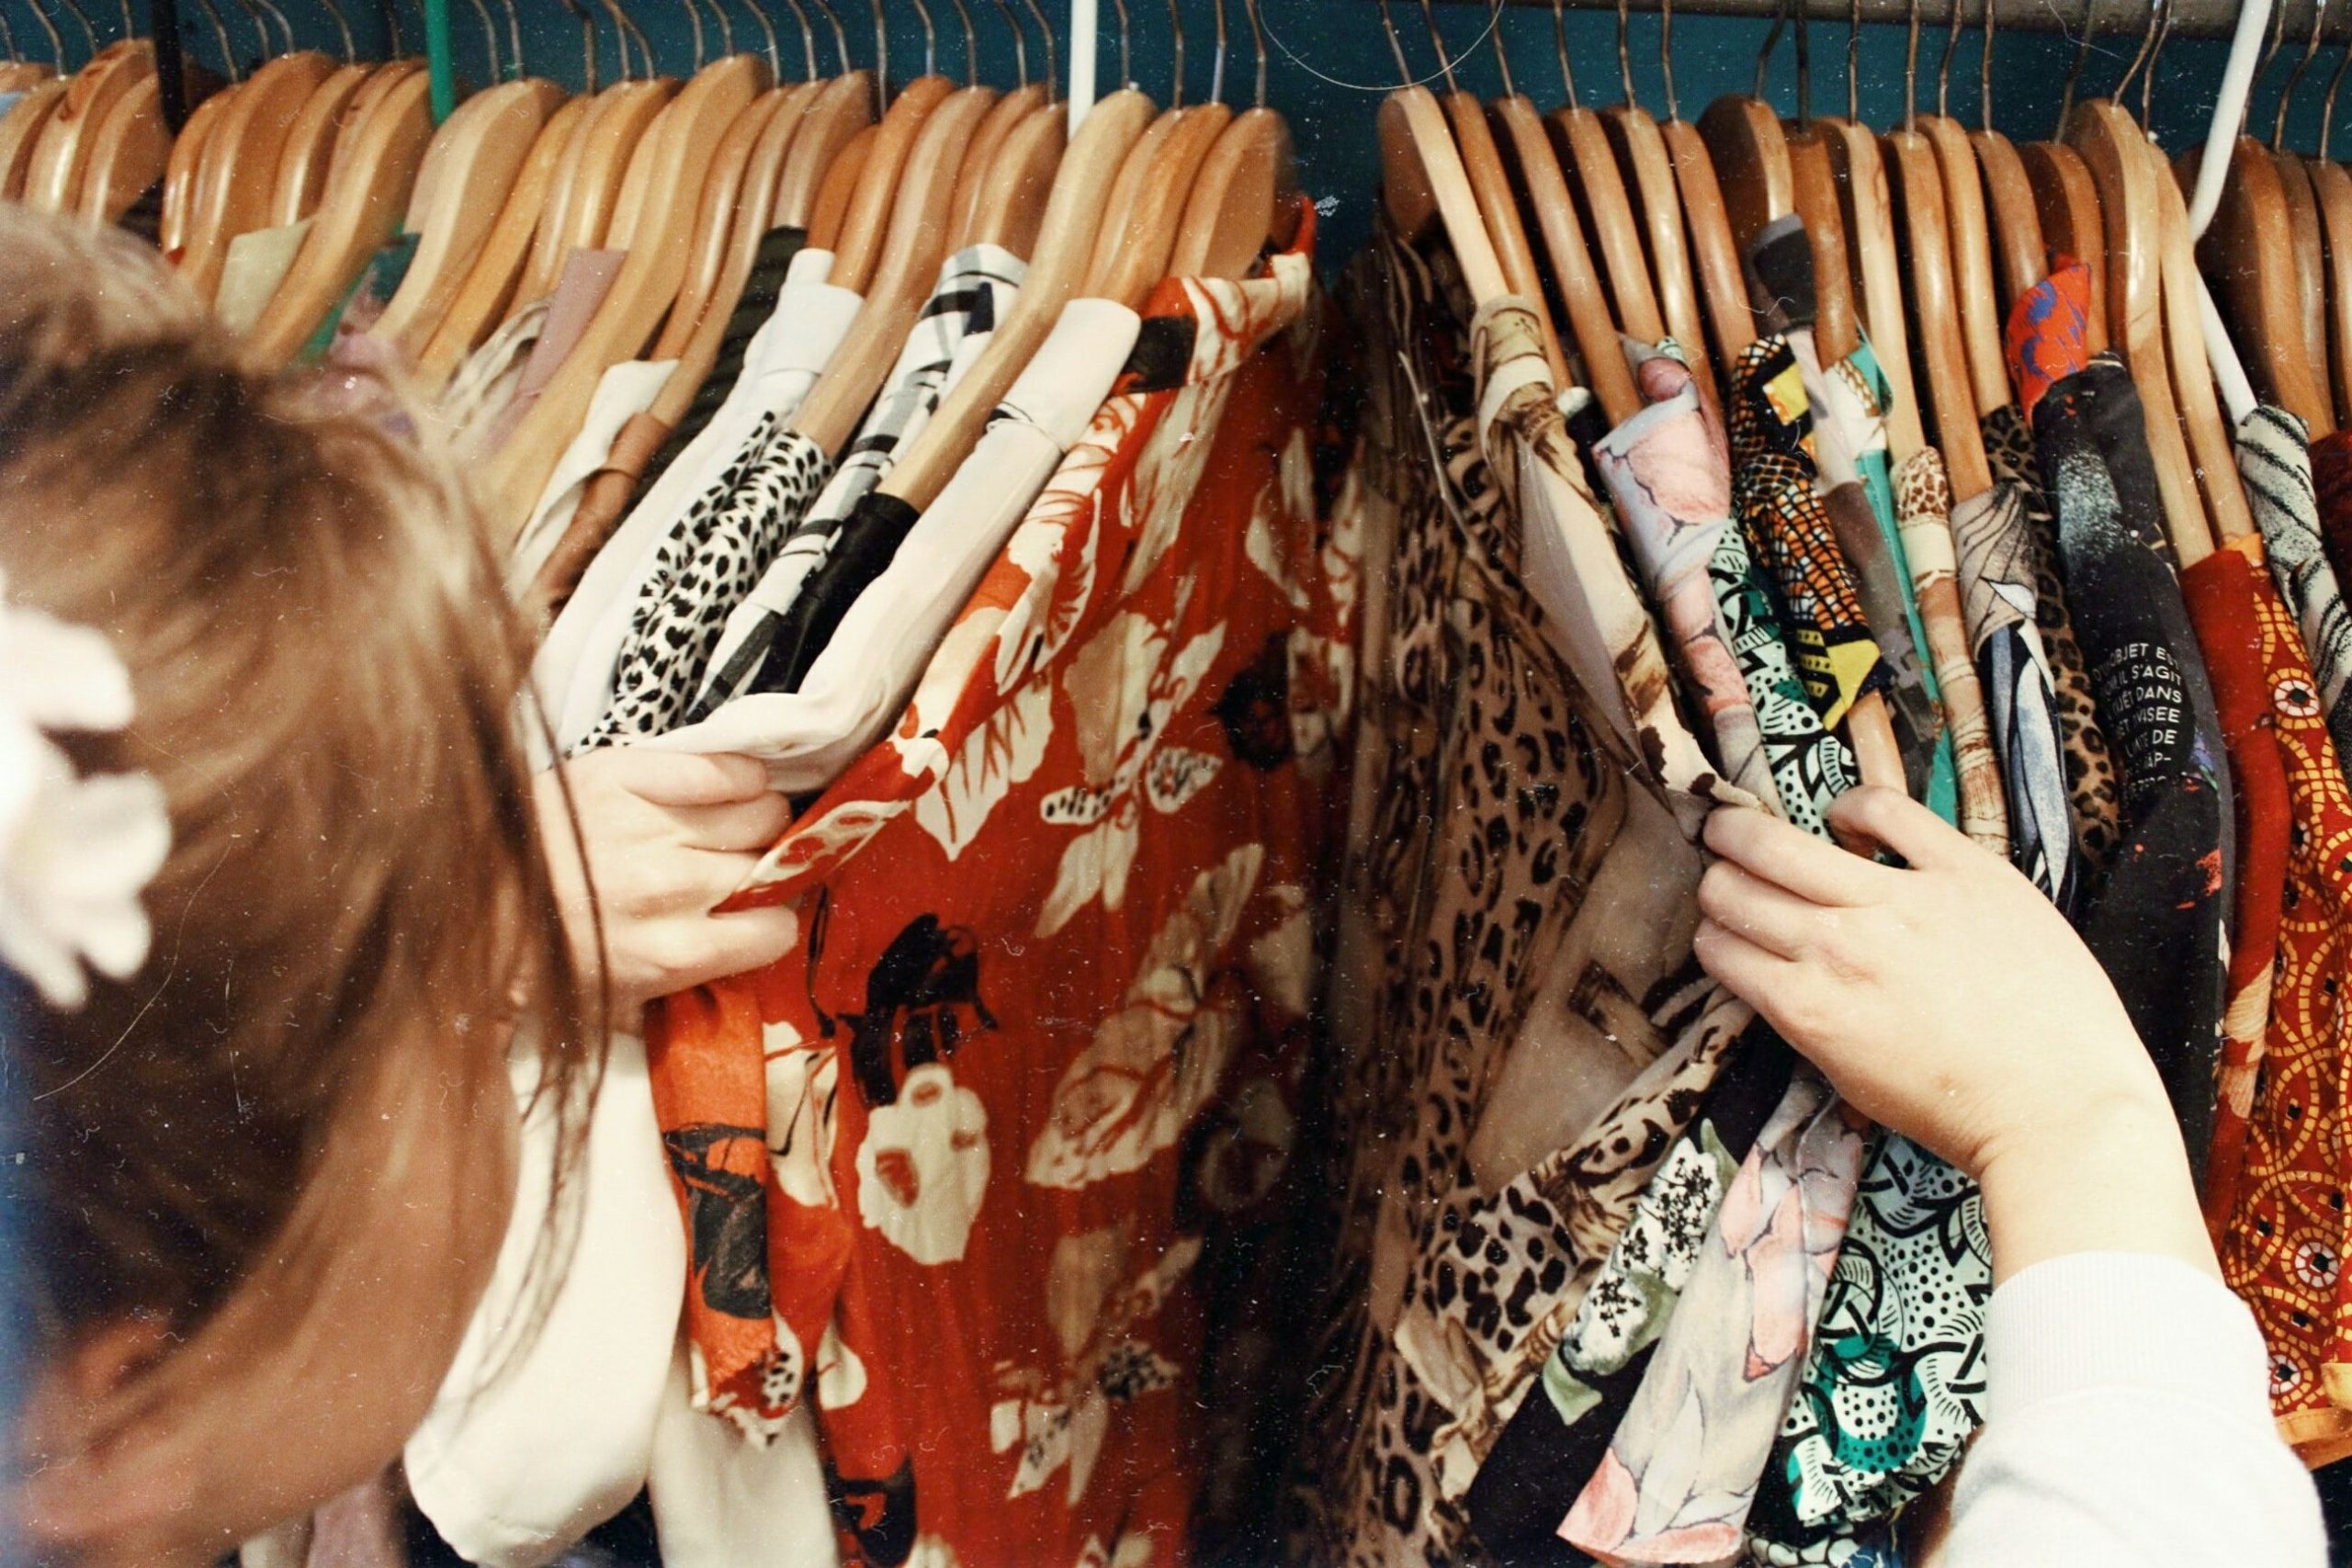 This festive season, dig deep into closets… your mom’s or daughter’s